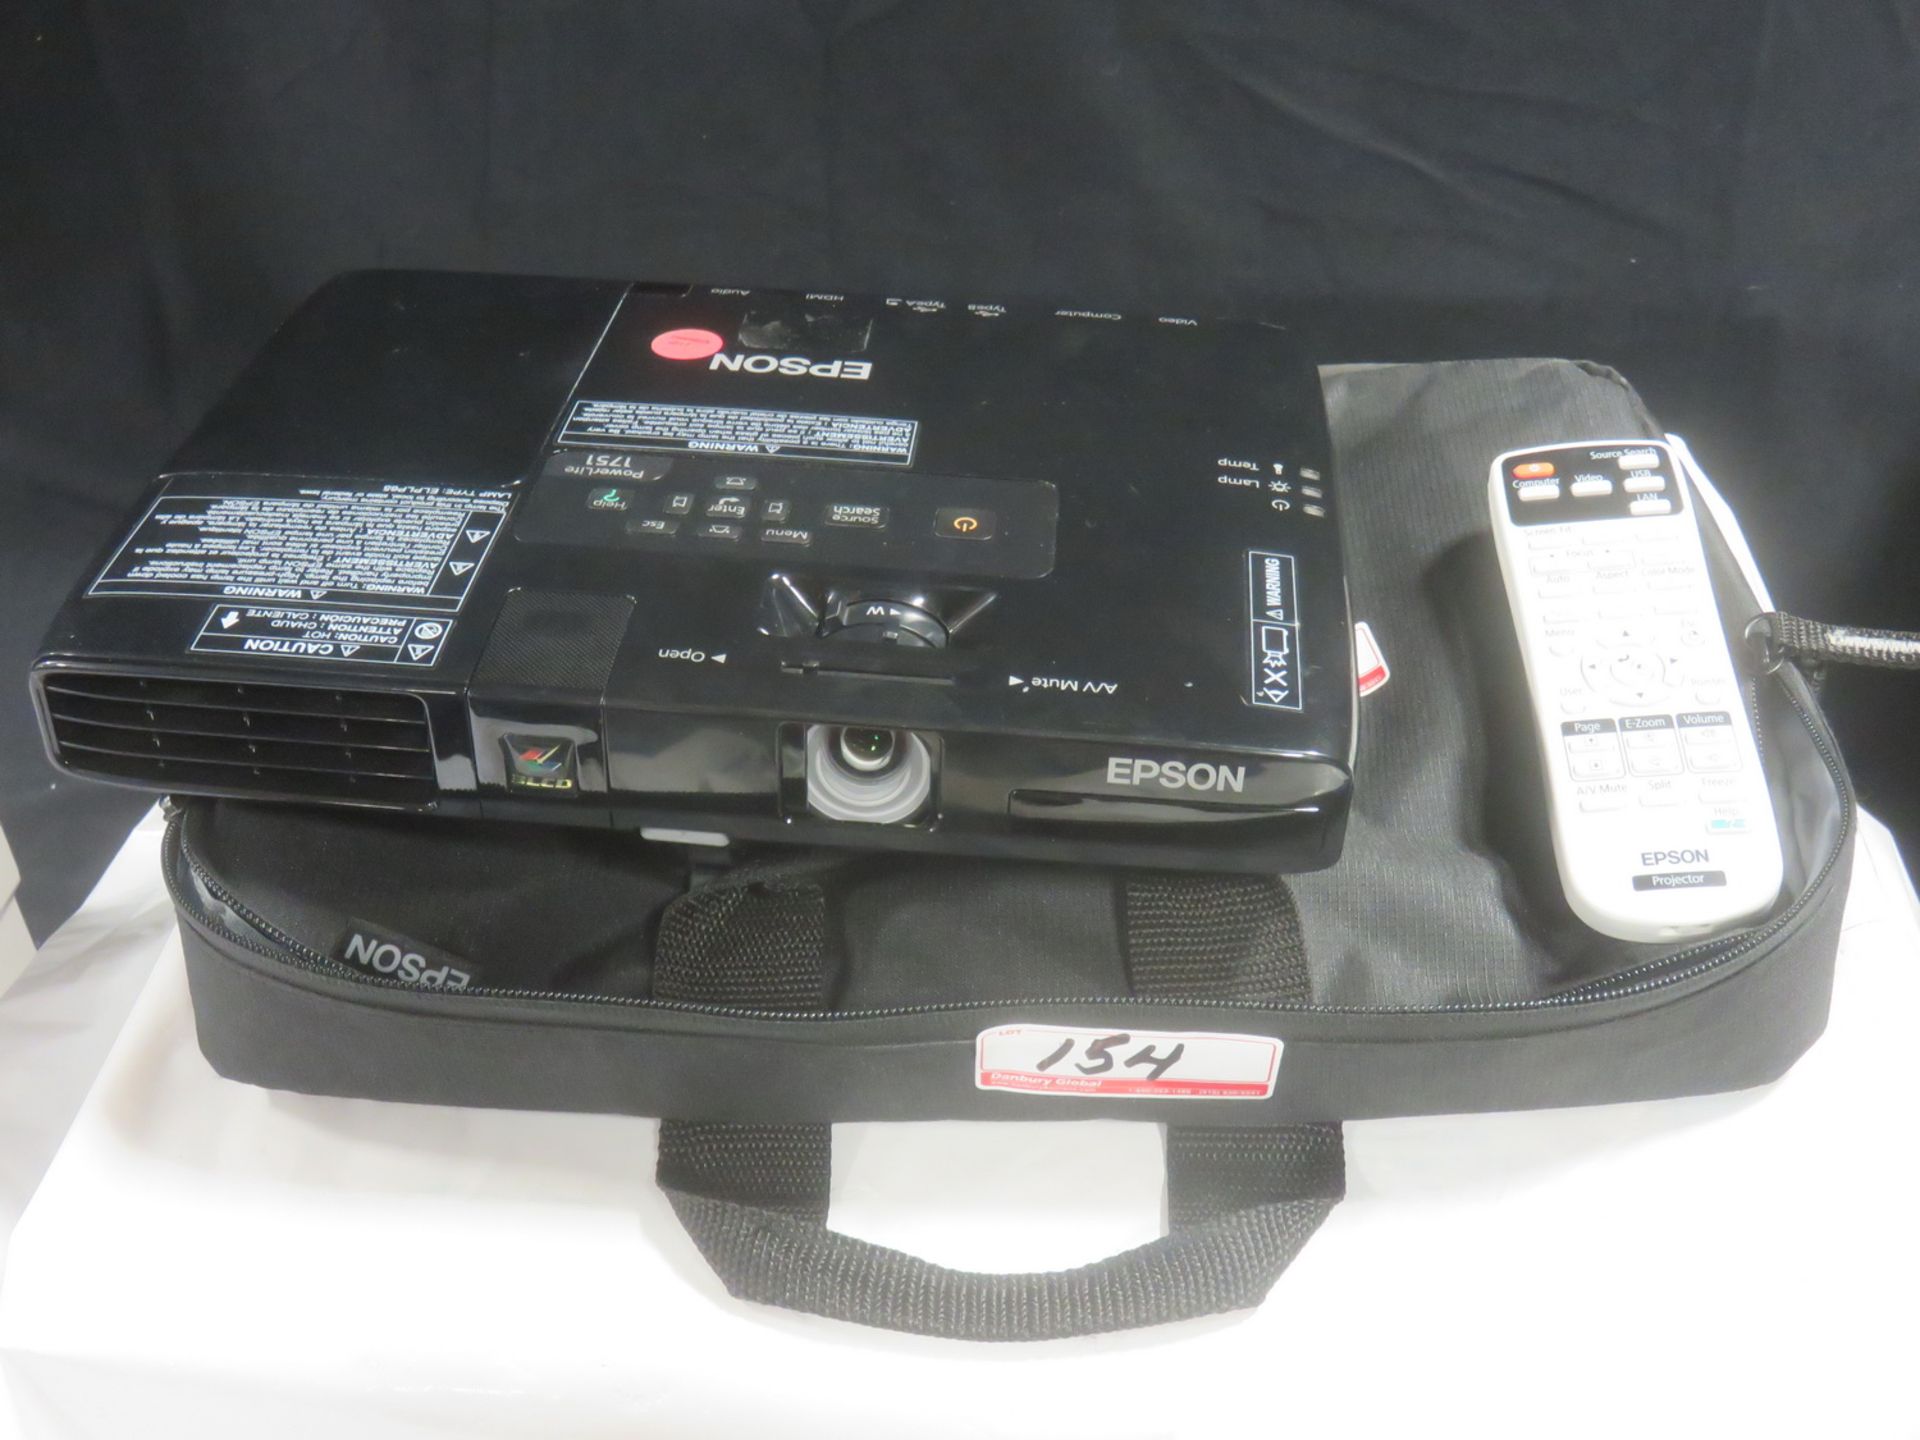 EPSON POWER LITE 1751 LCD PROJECTOR W/ REMOTE POWER CORD + TRAVEL BAG (487 HRS)